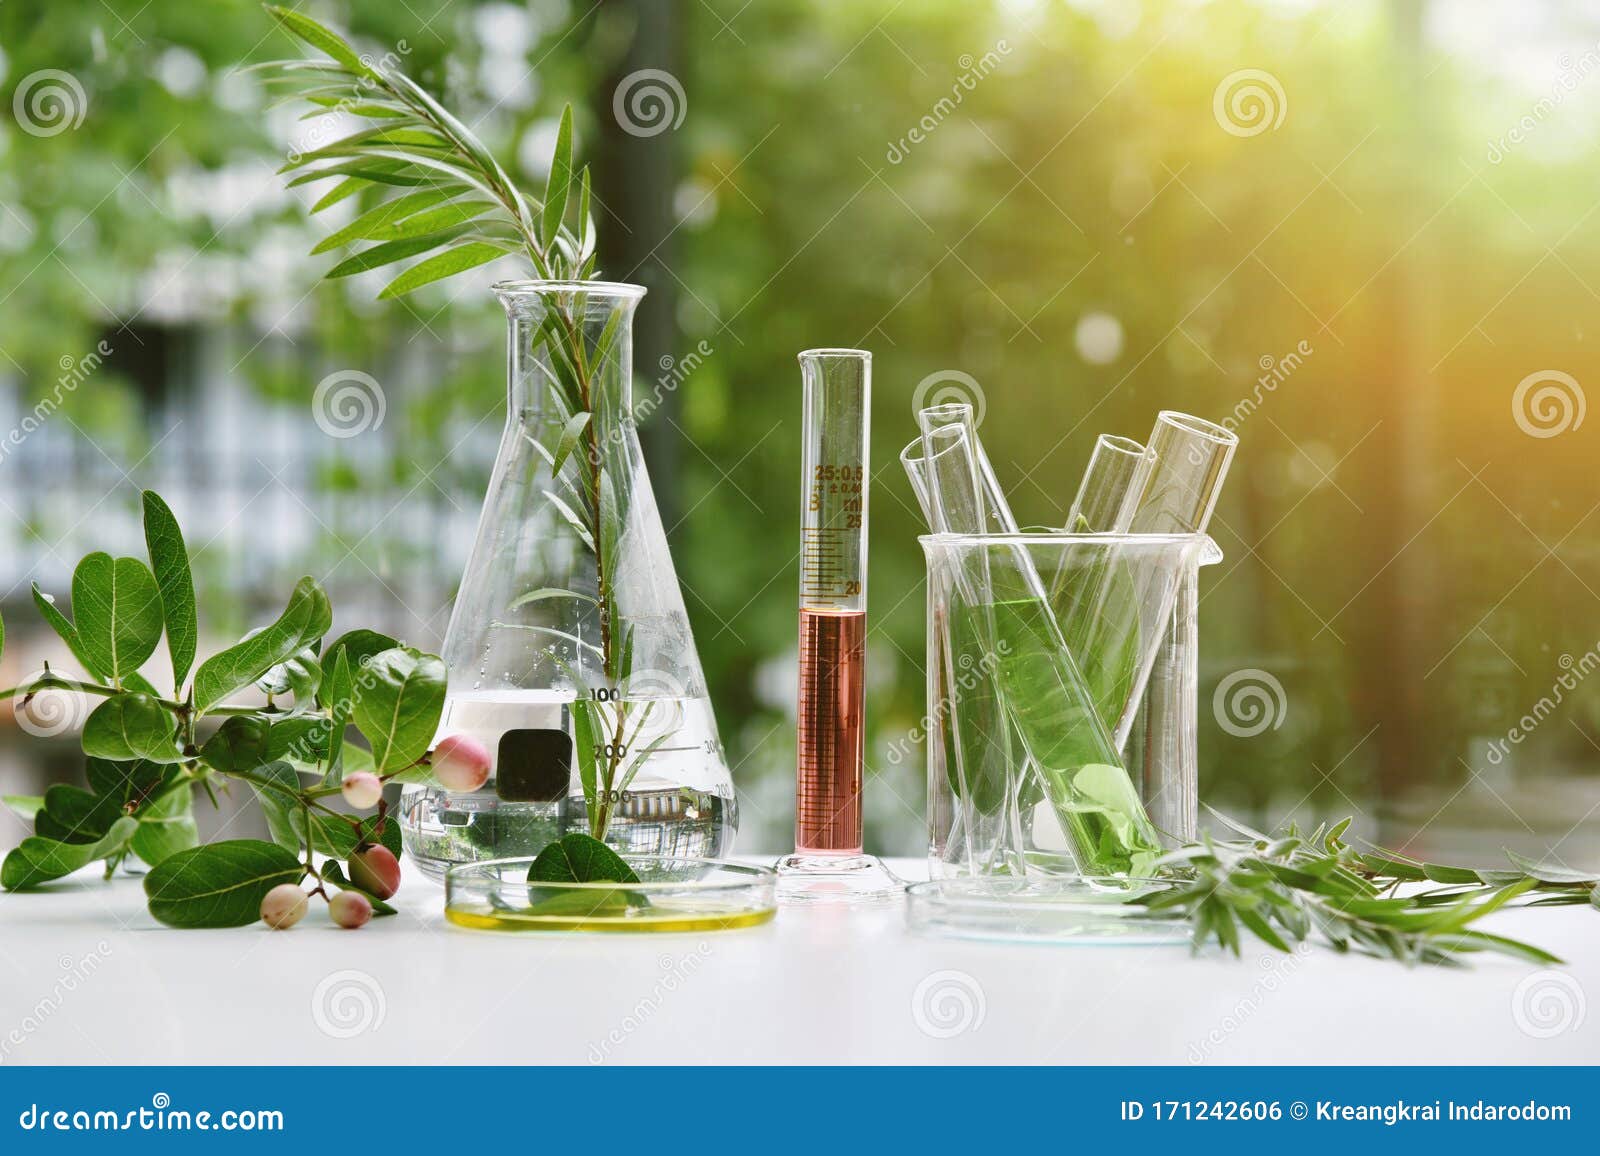 natural drug research, natural organic and scientific extraction in glassware, alternative green herb medicine.